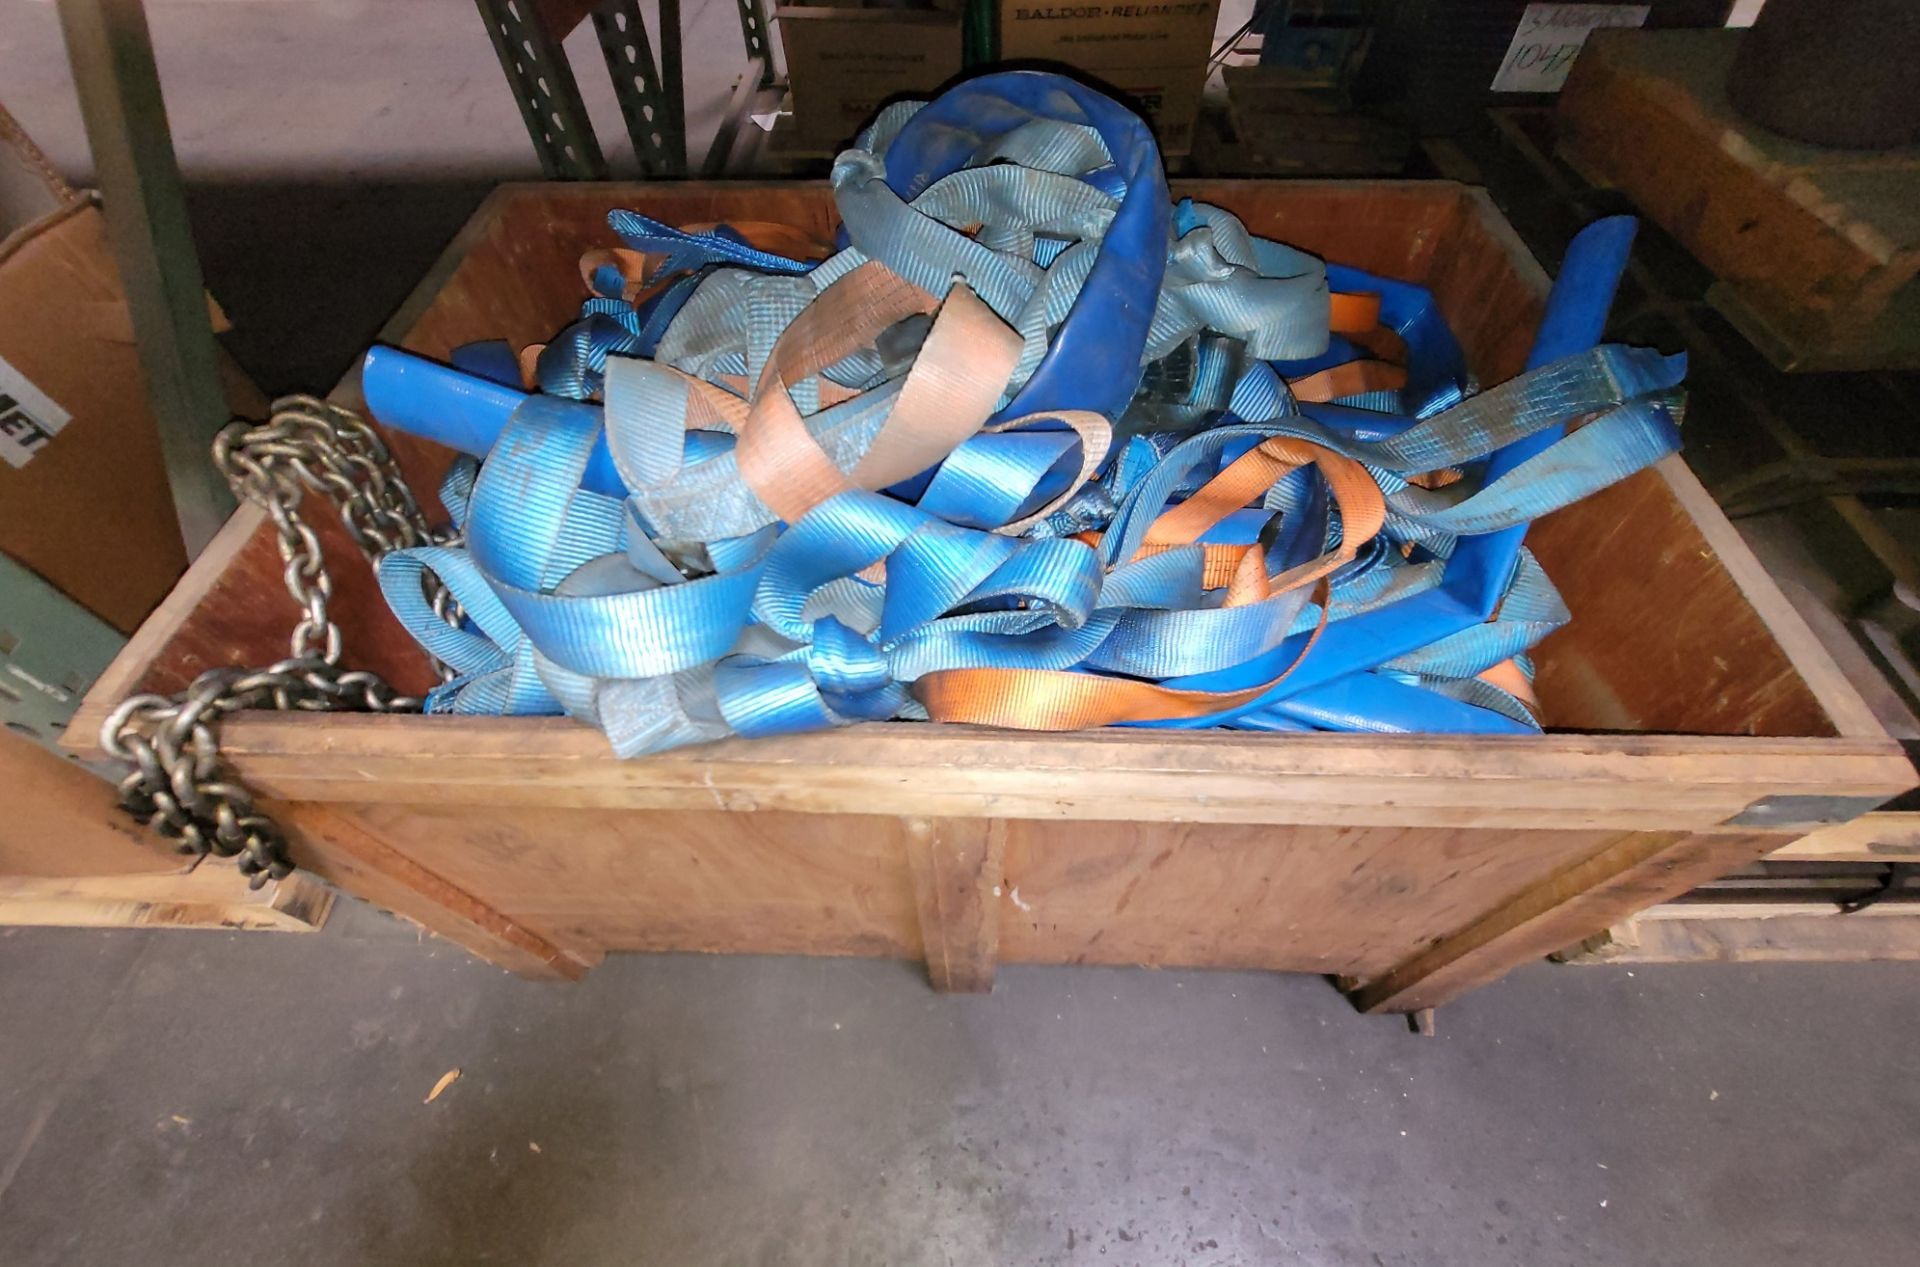 LOT - CRATE OF RIGGING CHAIN, NYLON SLINGS, ETC.